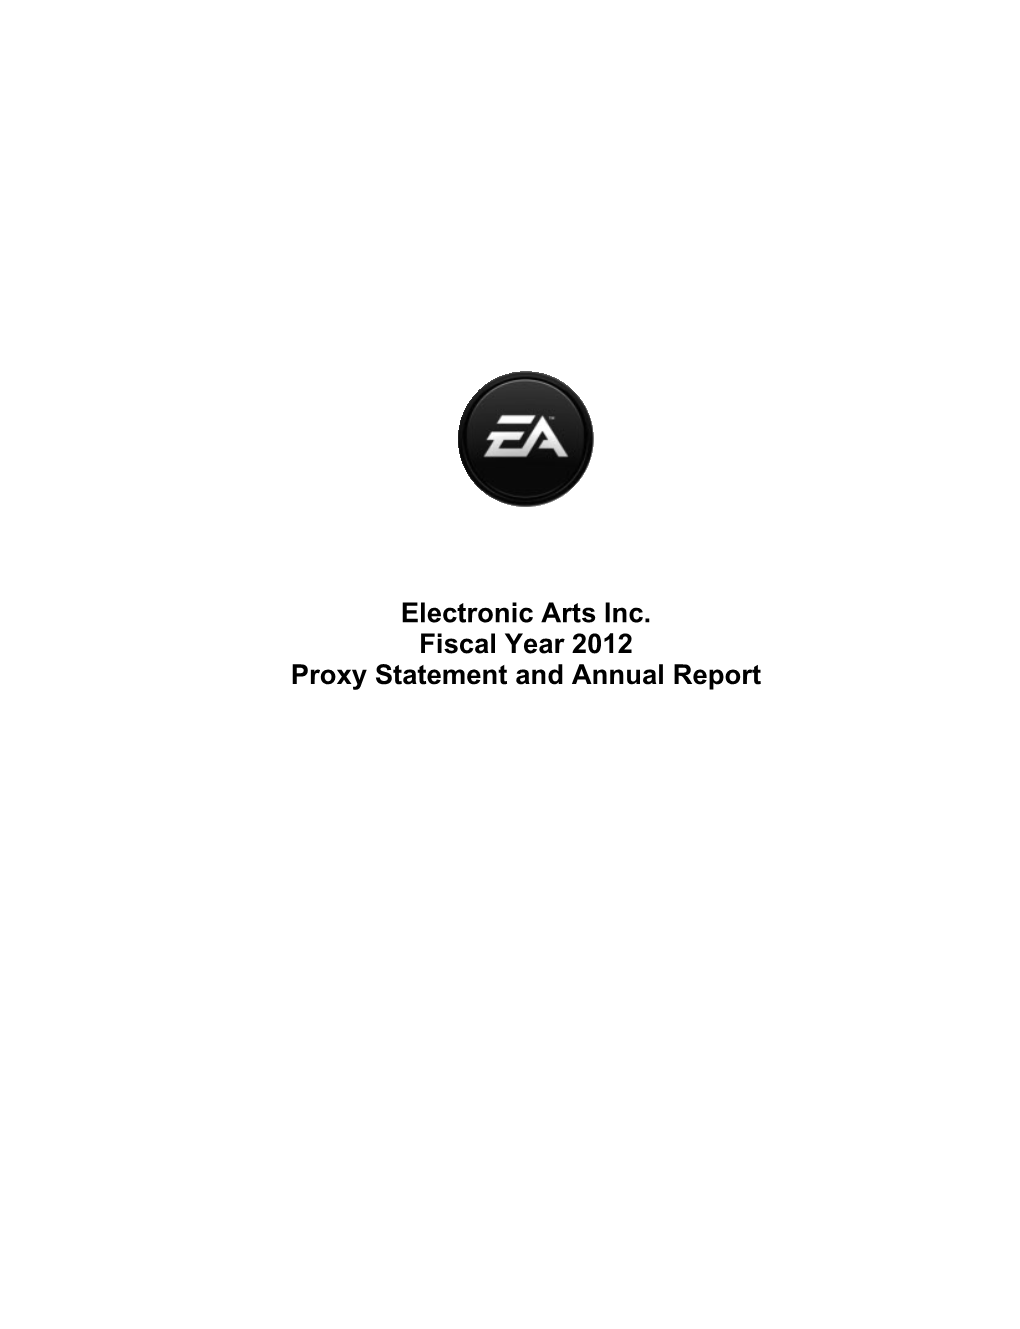 Electronic Arts Inc. Fiscal Year 2012 Proxy Statement and Annual Report